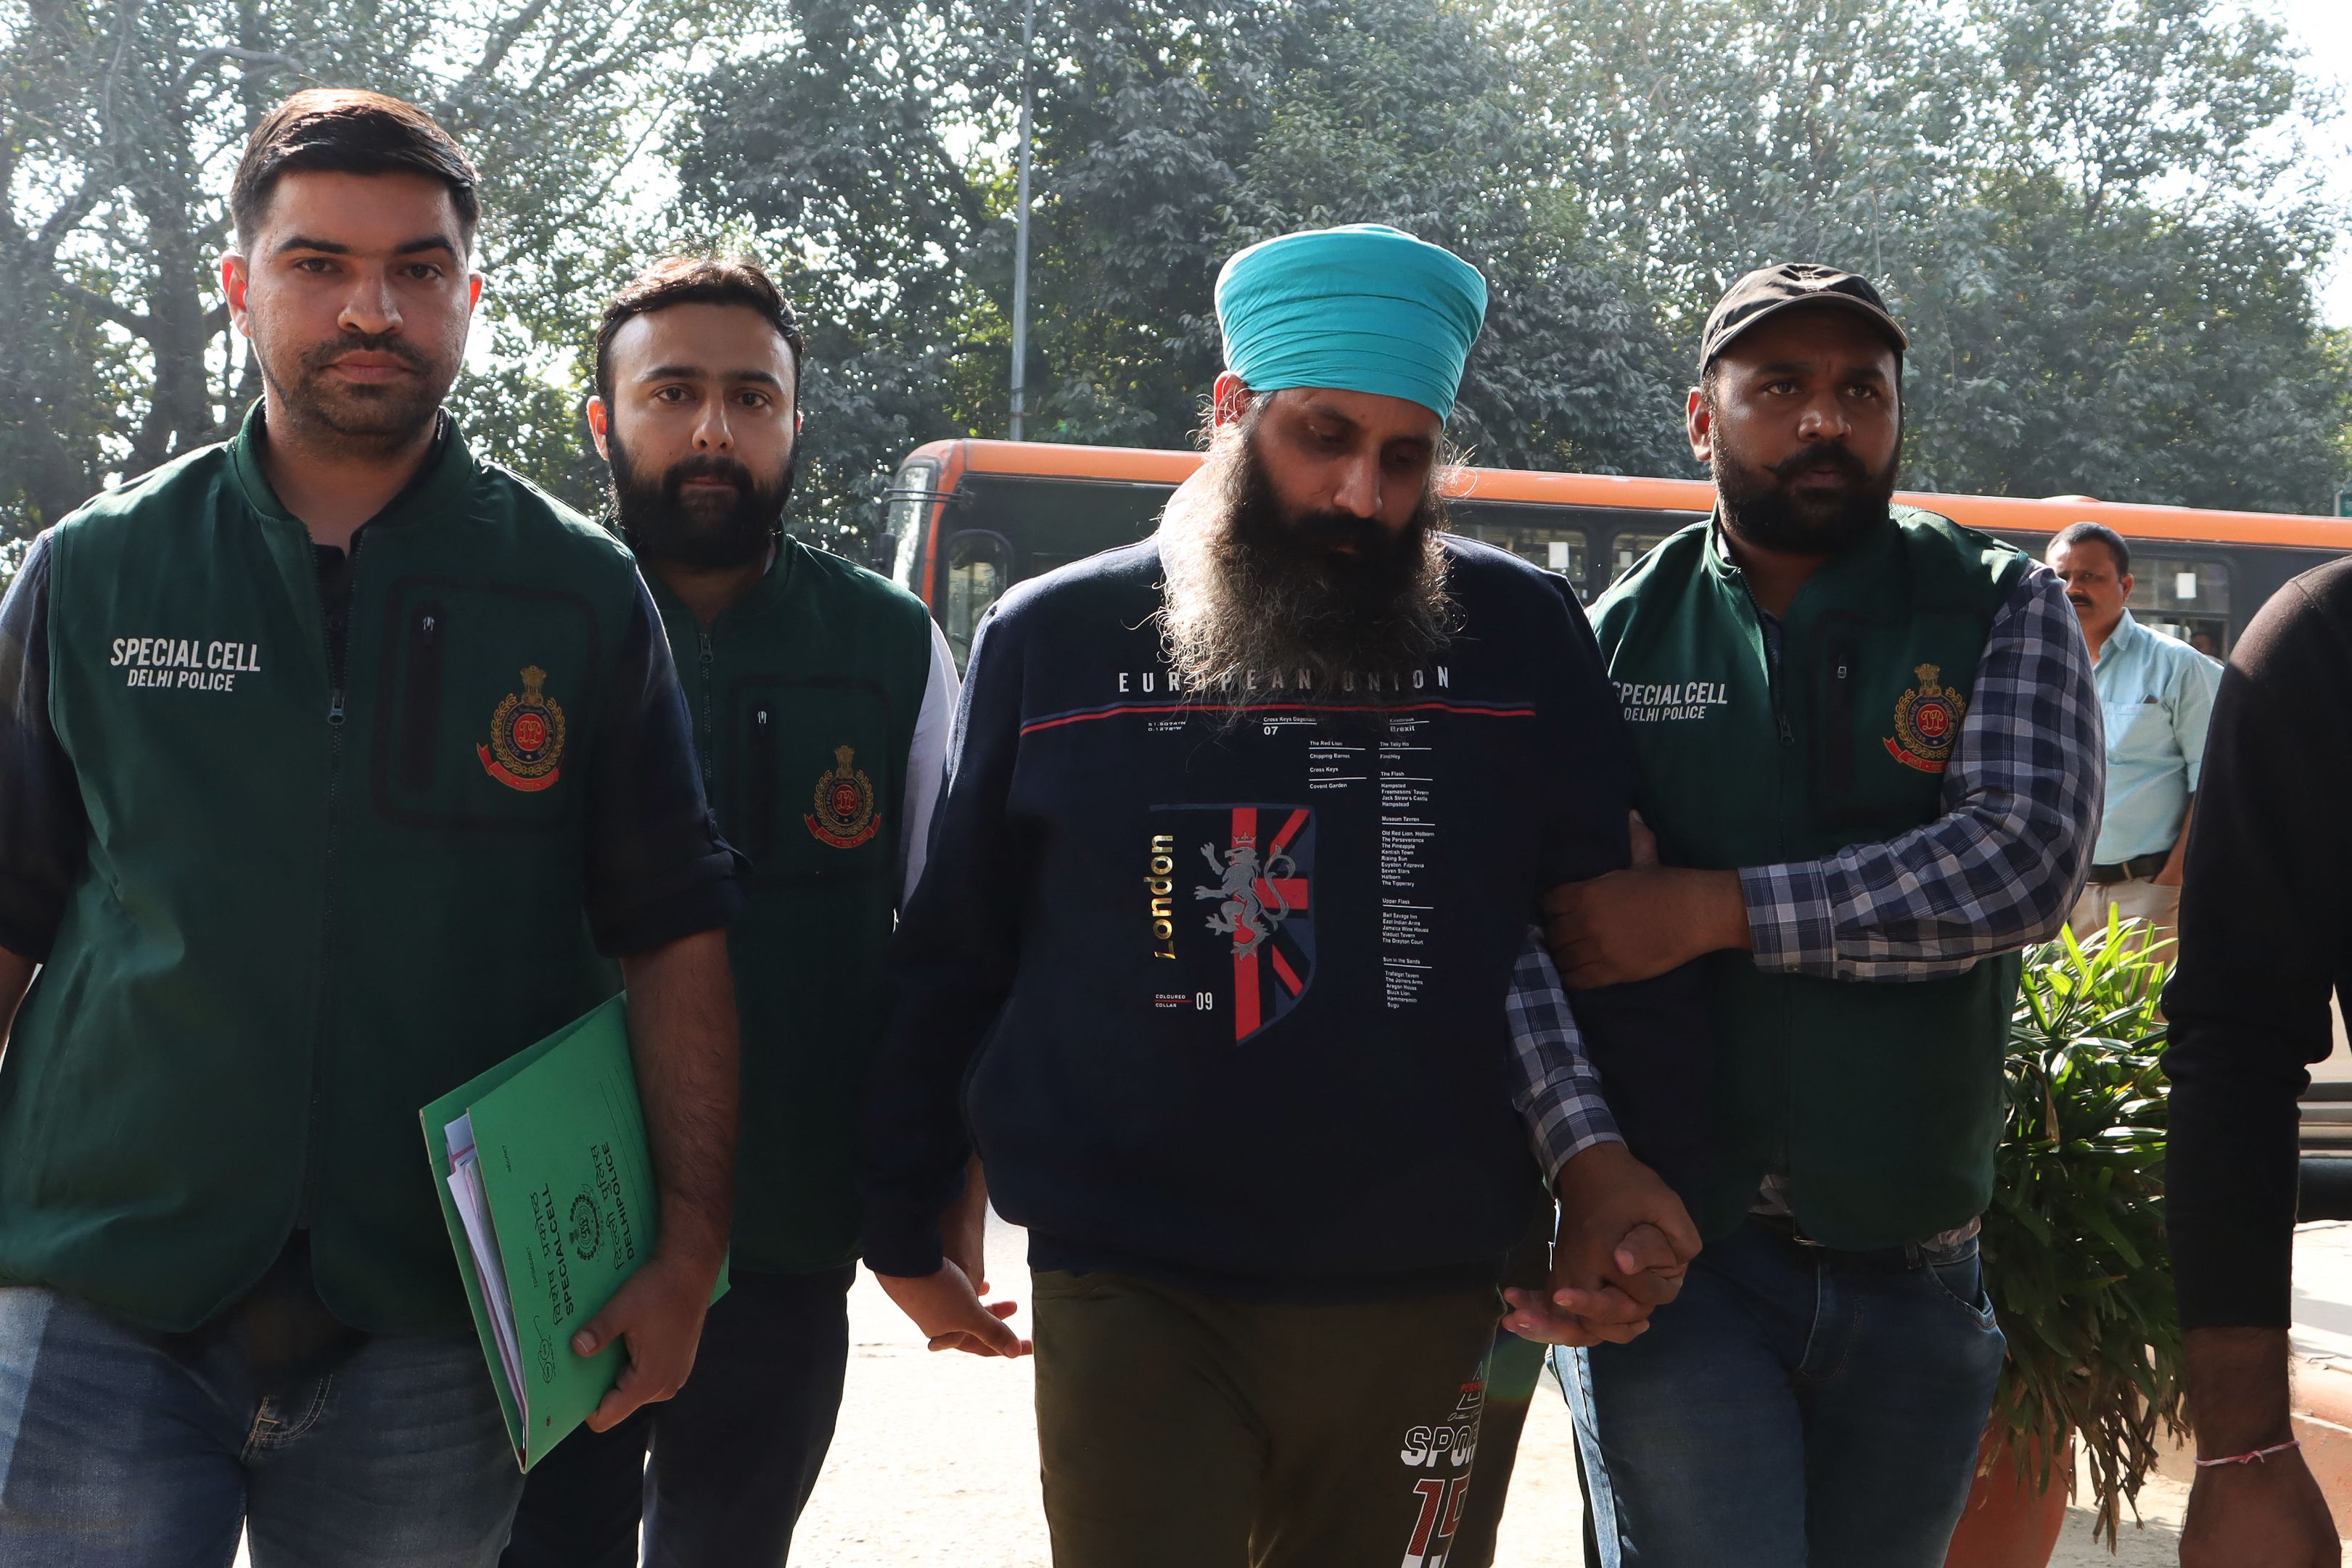 Delhi Police Special Cell officers escort Rajwinder Singh to Patiala court after being arrested in relation to the 2018 murder of Australian national Toyah Cordingley